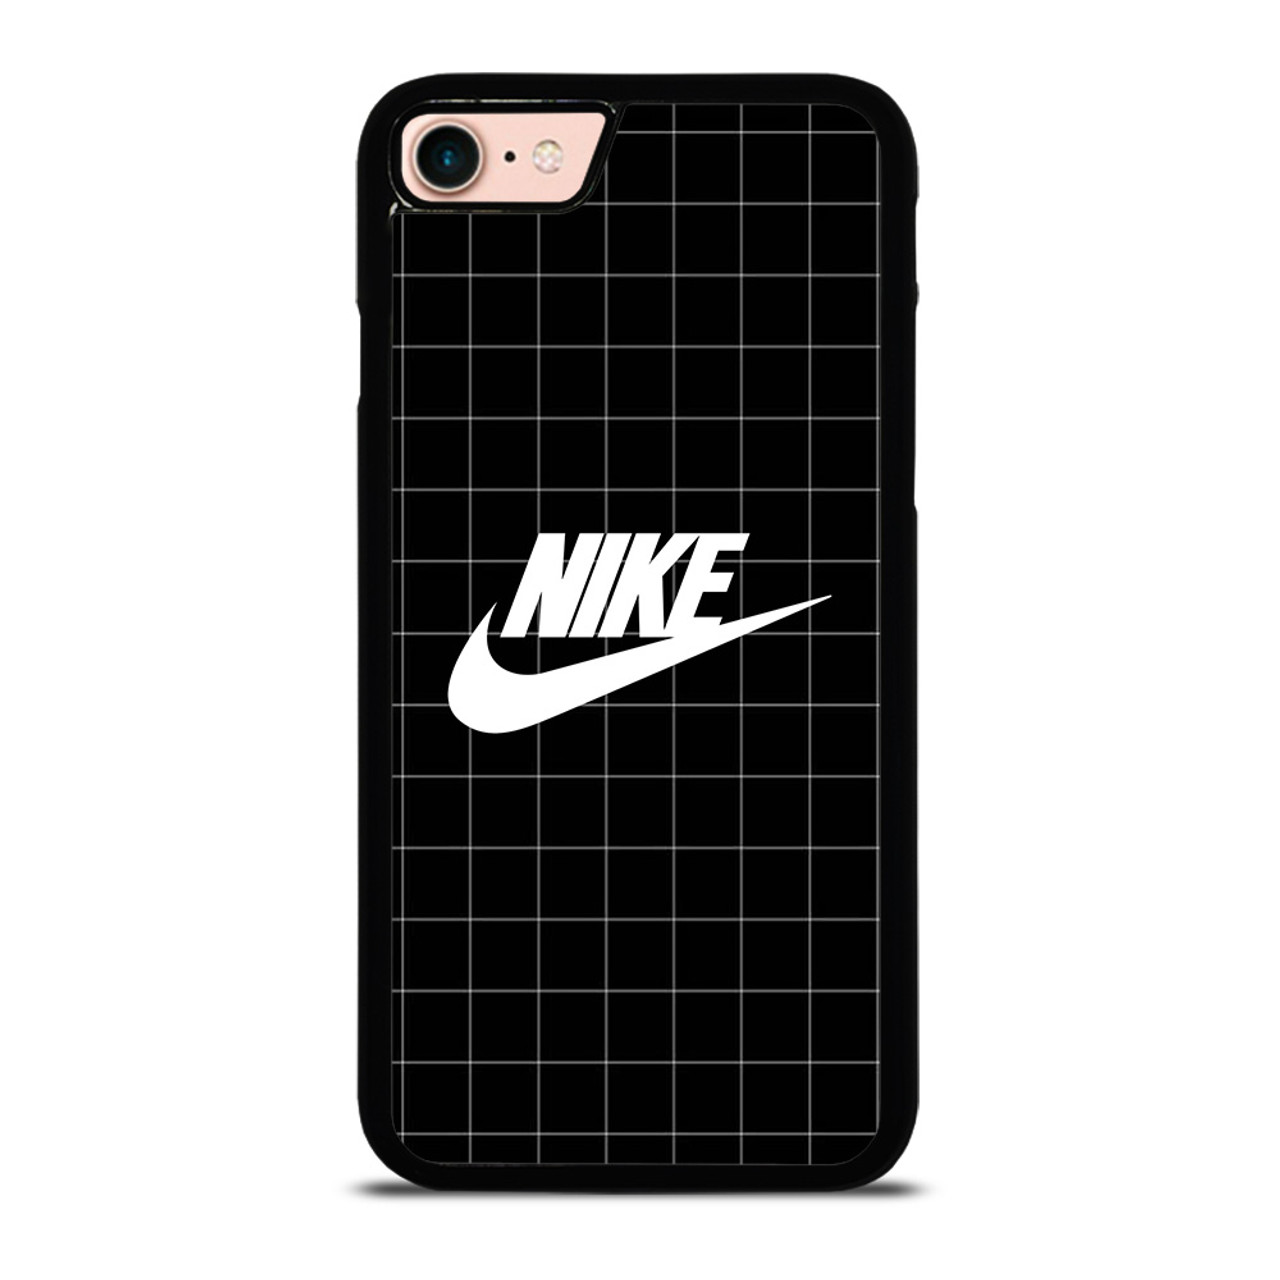 NIKE LOGO AESTHETIC iPhone 8 Case Cover